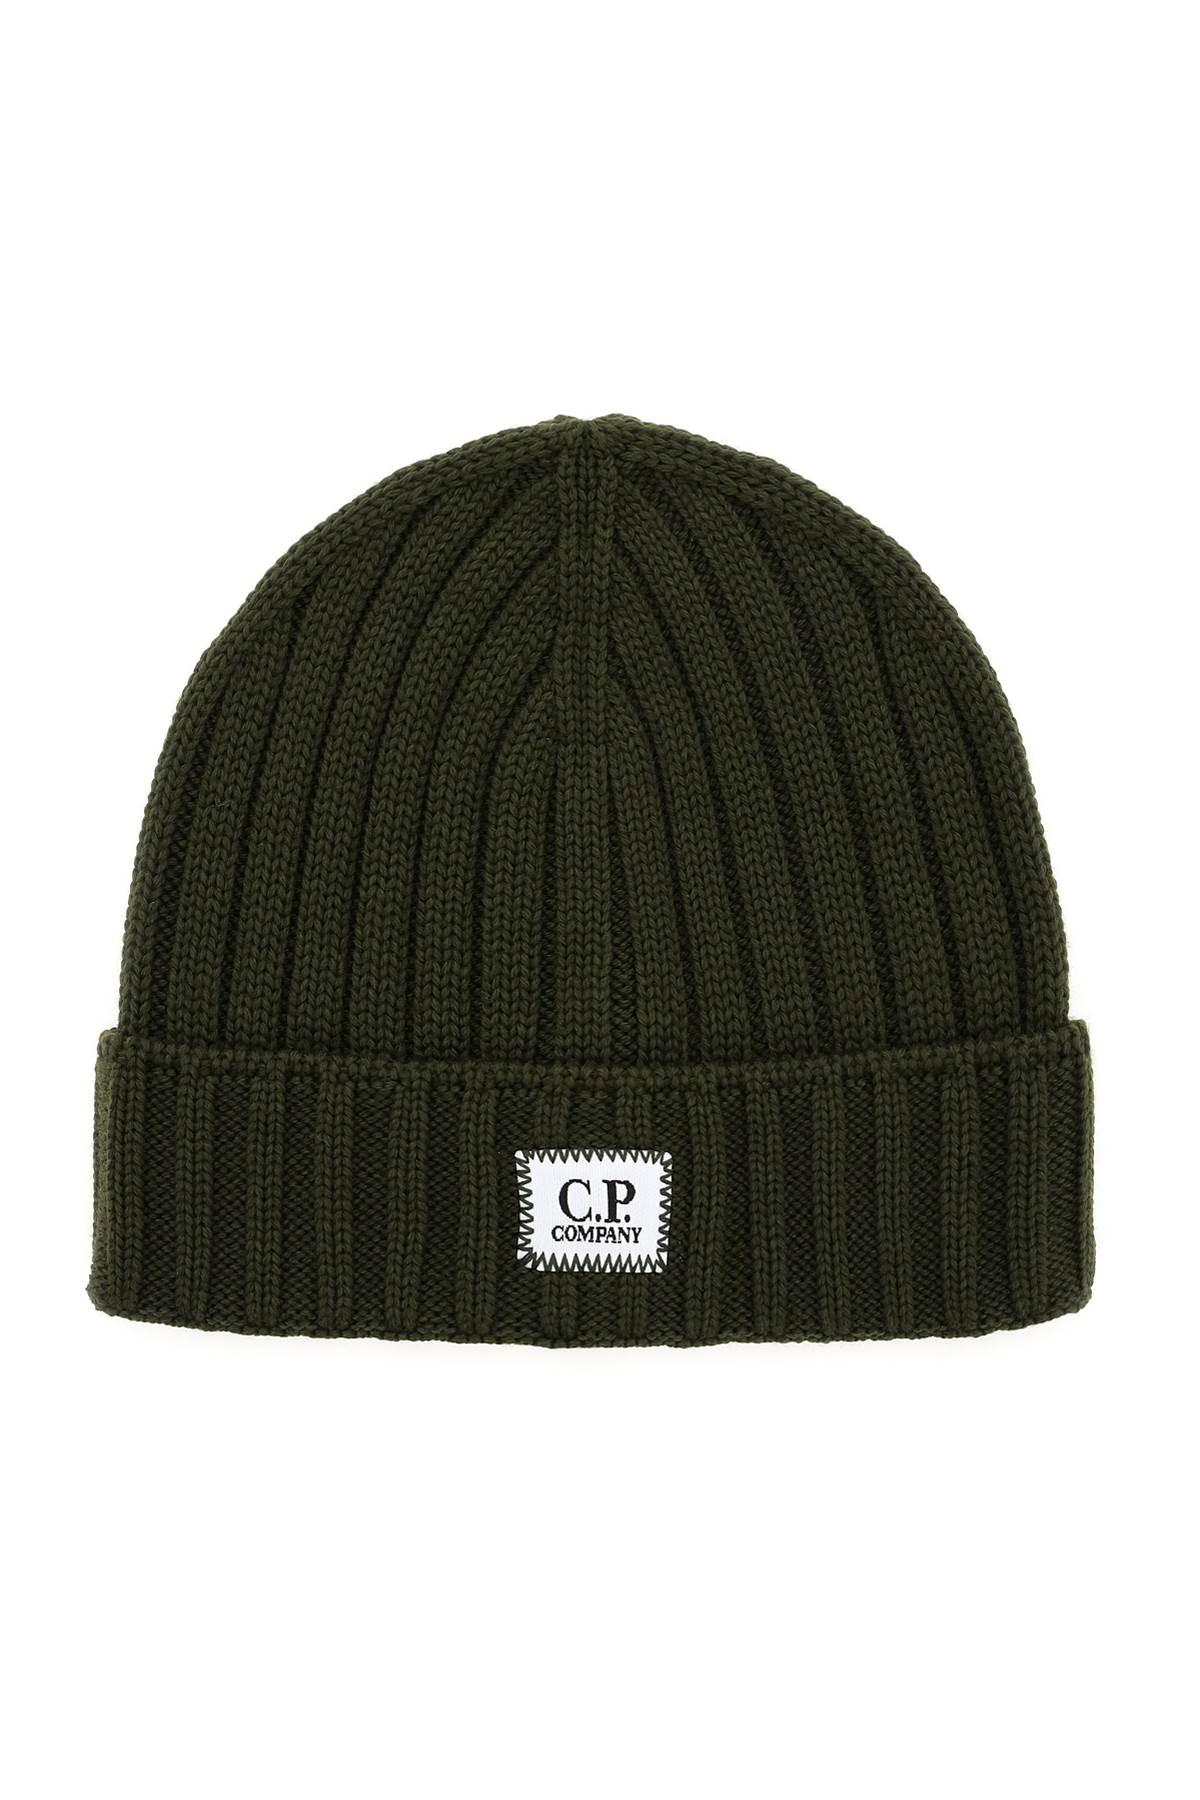 C.P. Company Cp Company Wool Beanie Hat in Green for Men | Lyst